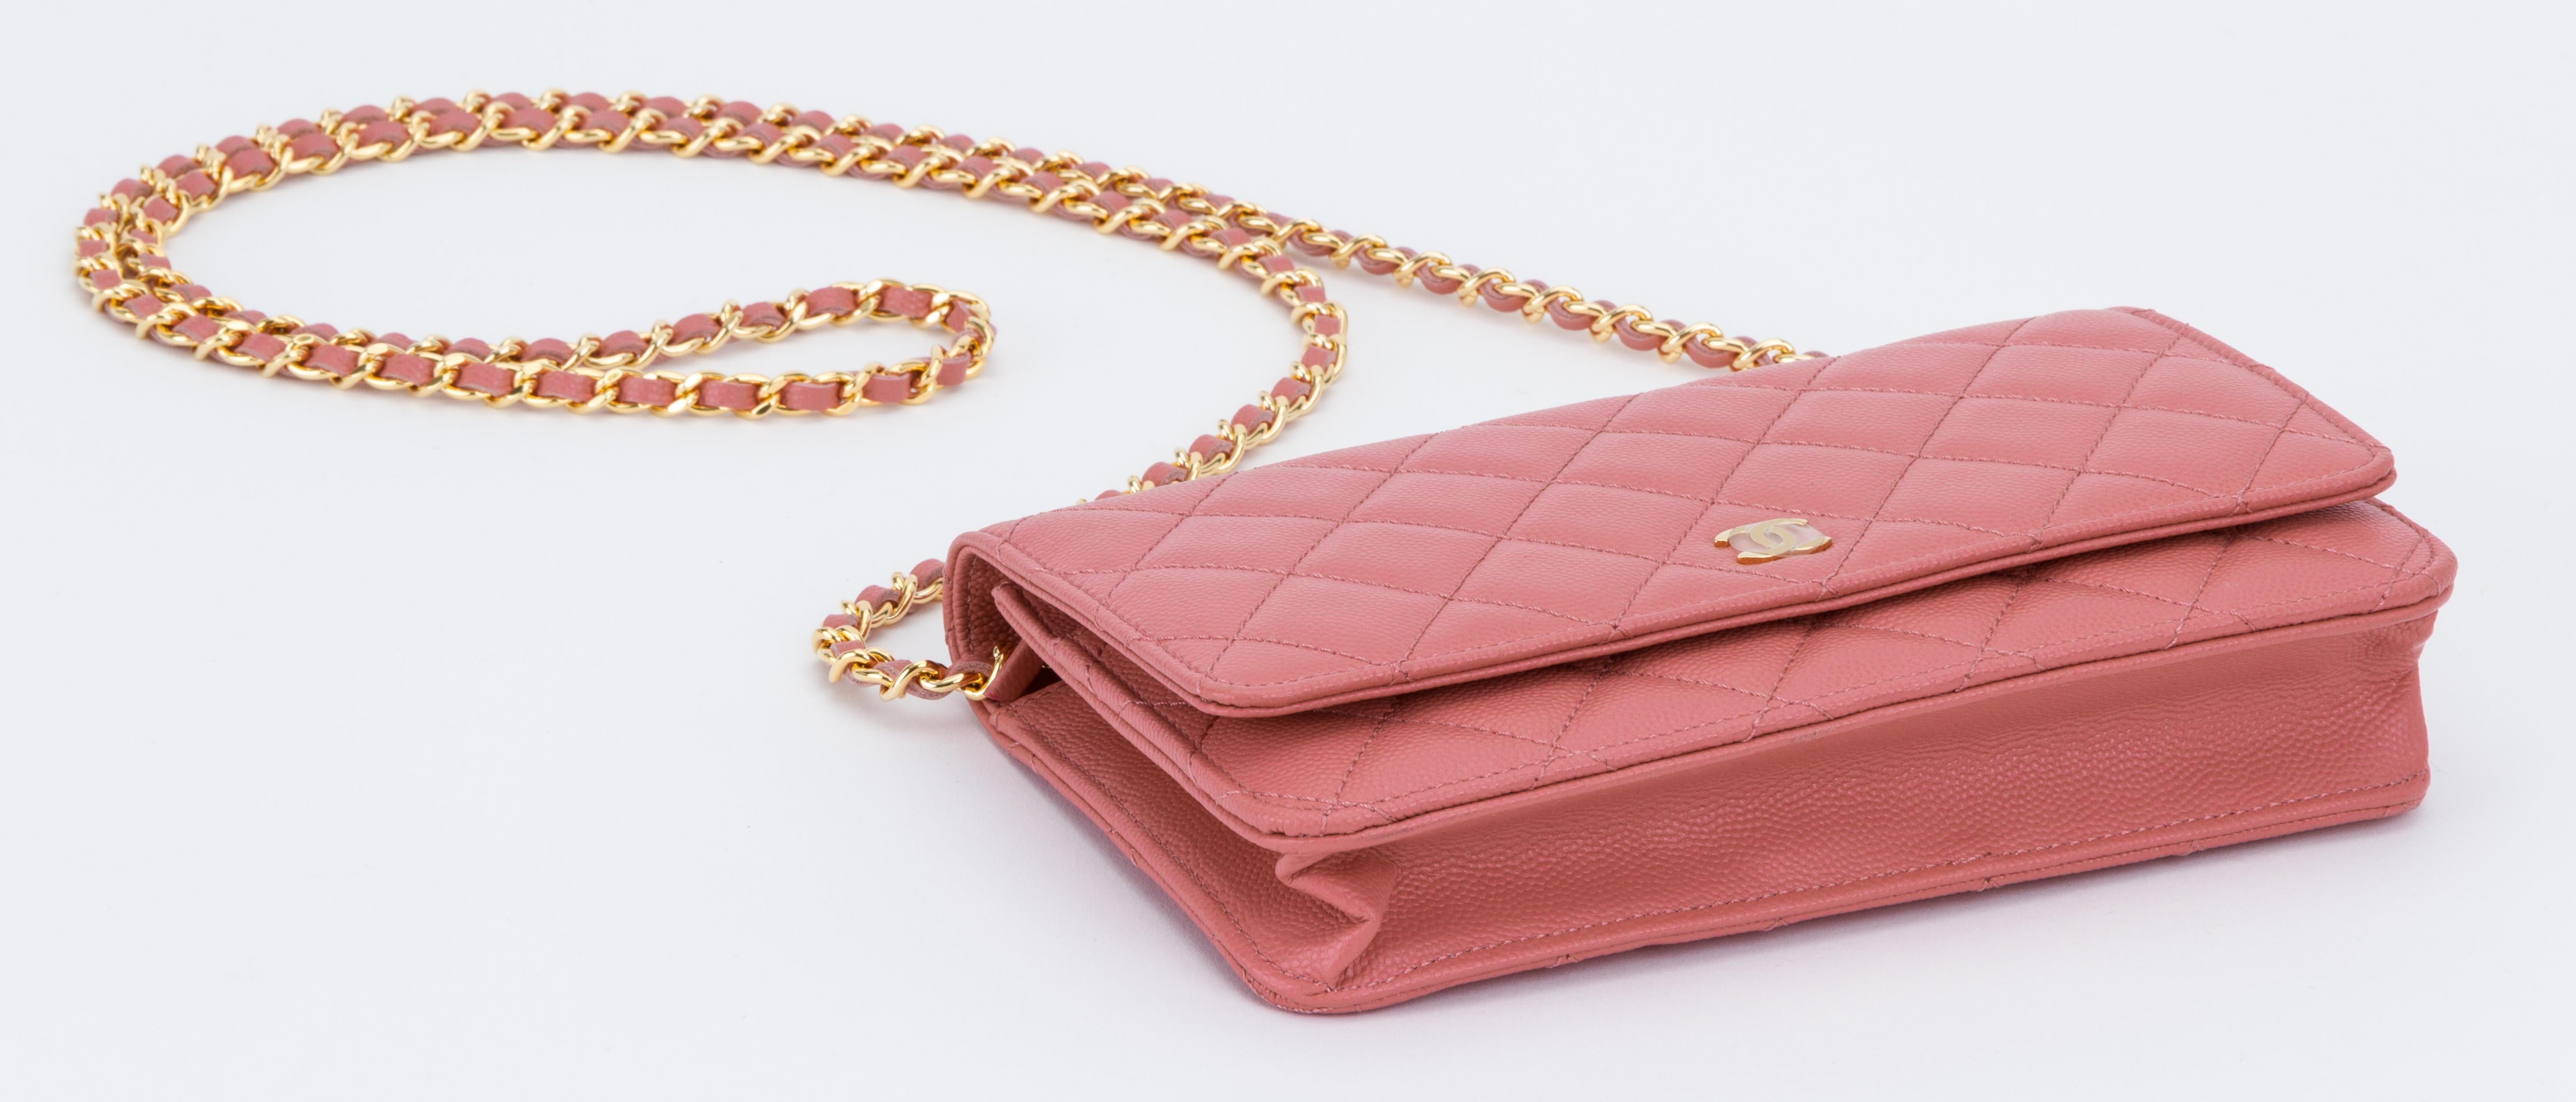 Women's New Chanel PInk Caviar Wallet On A Chain Bag